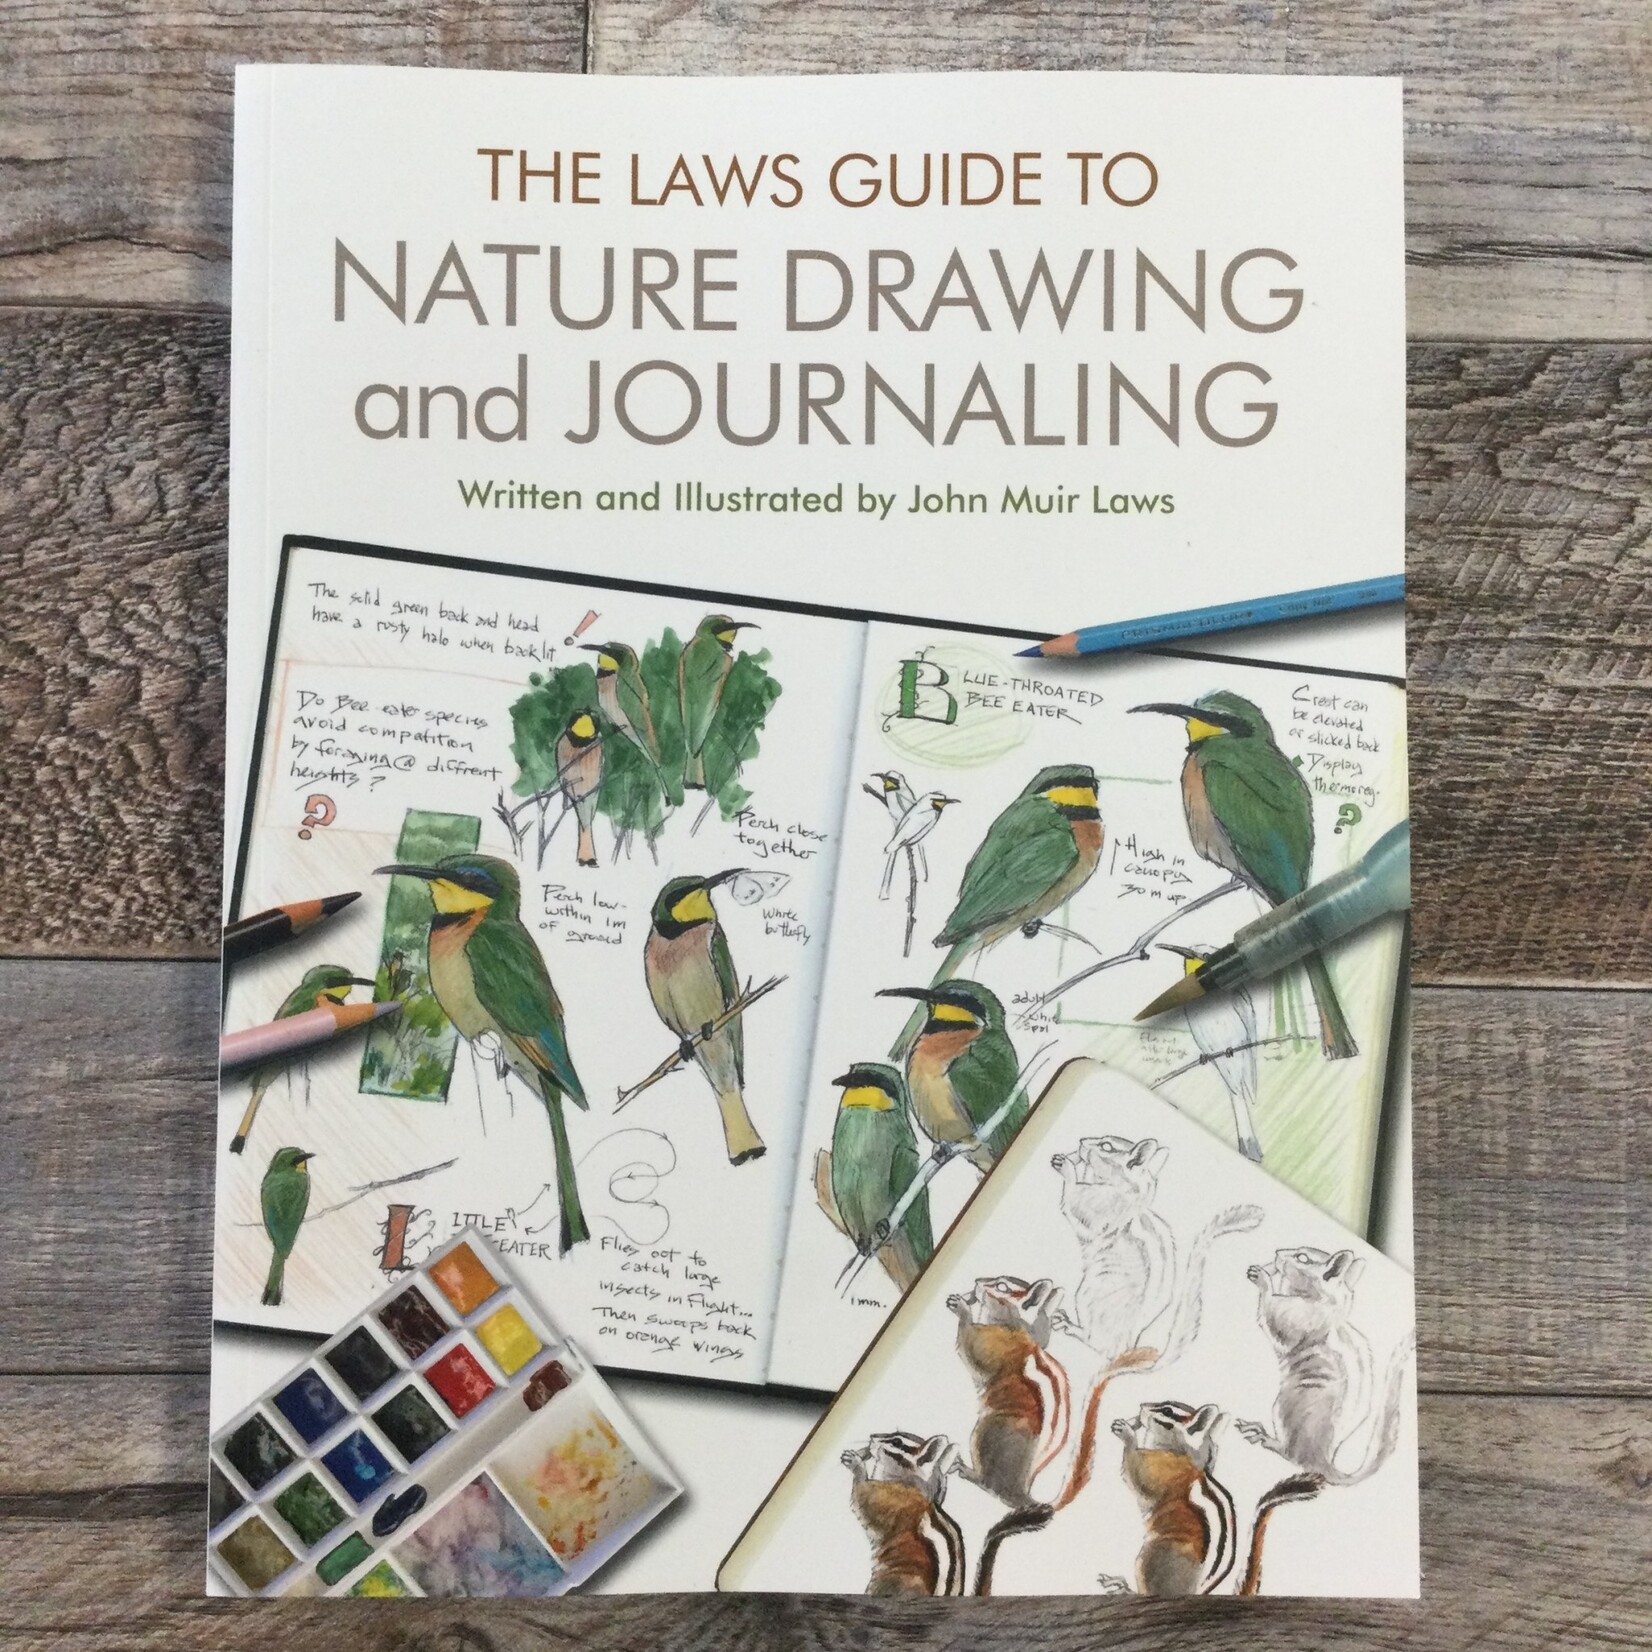 The Laws Guide to Nature Drawing and Journaling Book Backyard Birds